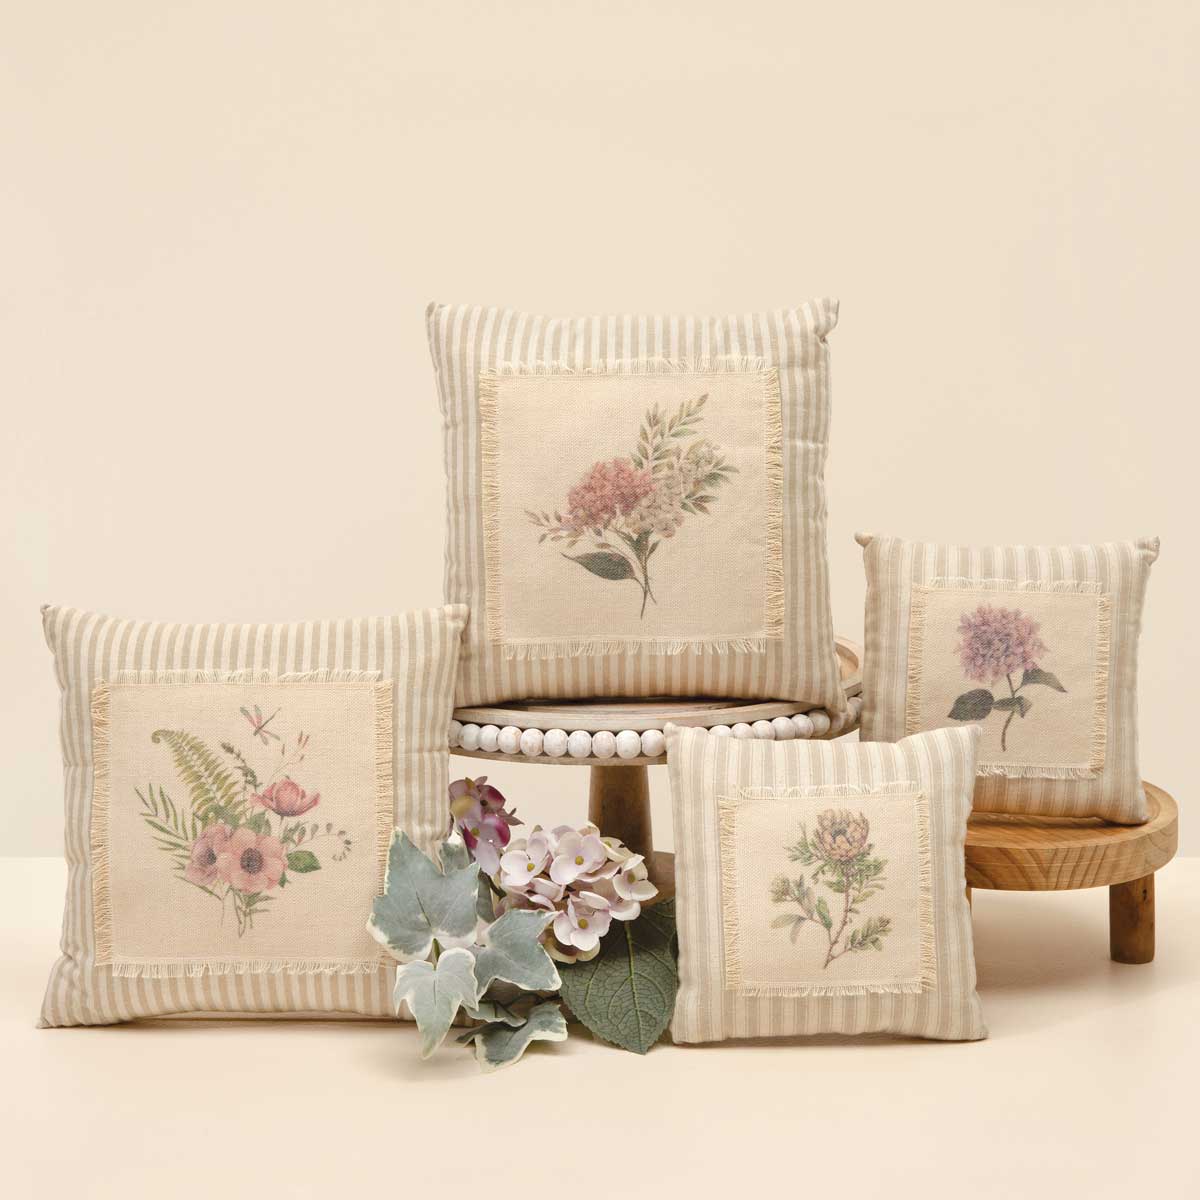 PILLOW FLOWER 2 ASSORTED SMALL 6IN X 6IN BEIGE/CREAM PLUSH